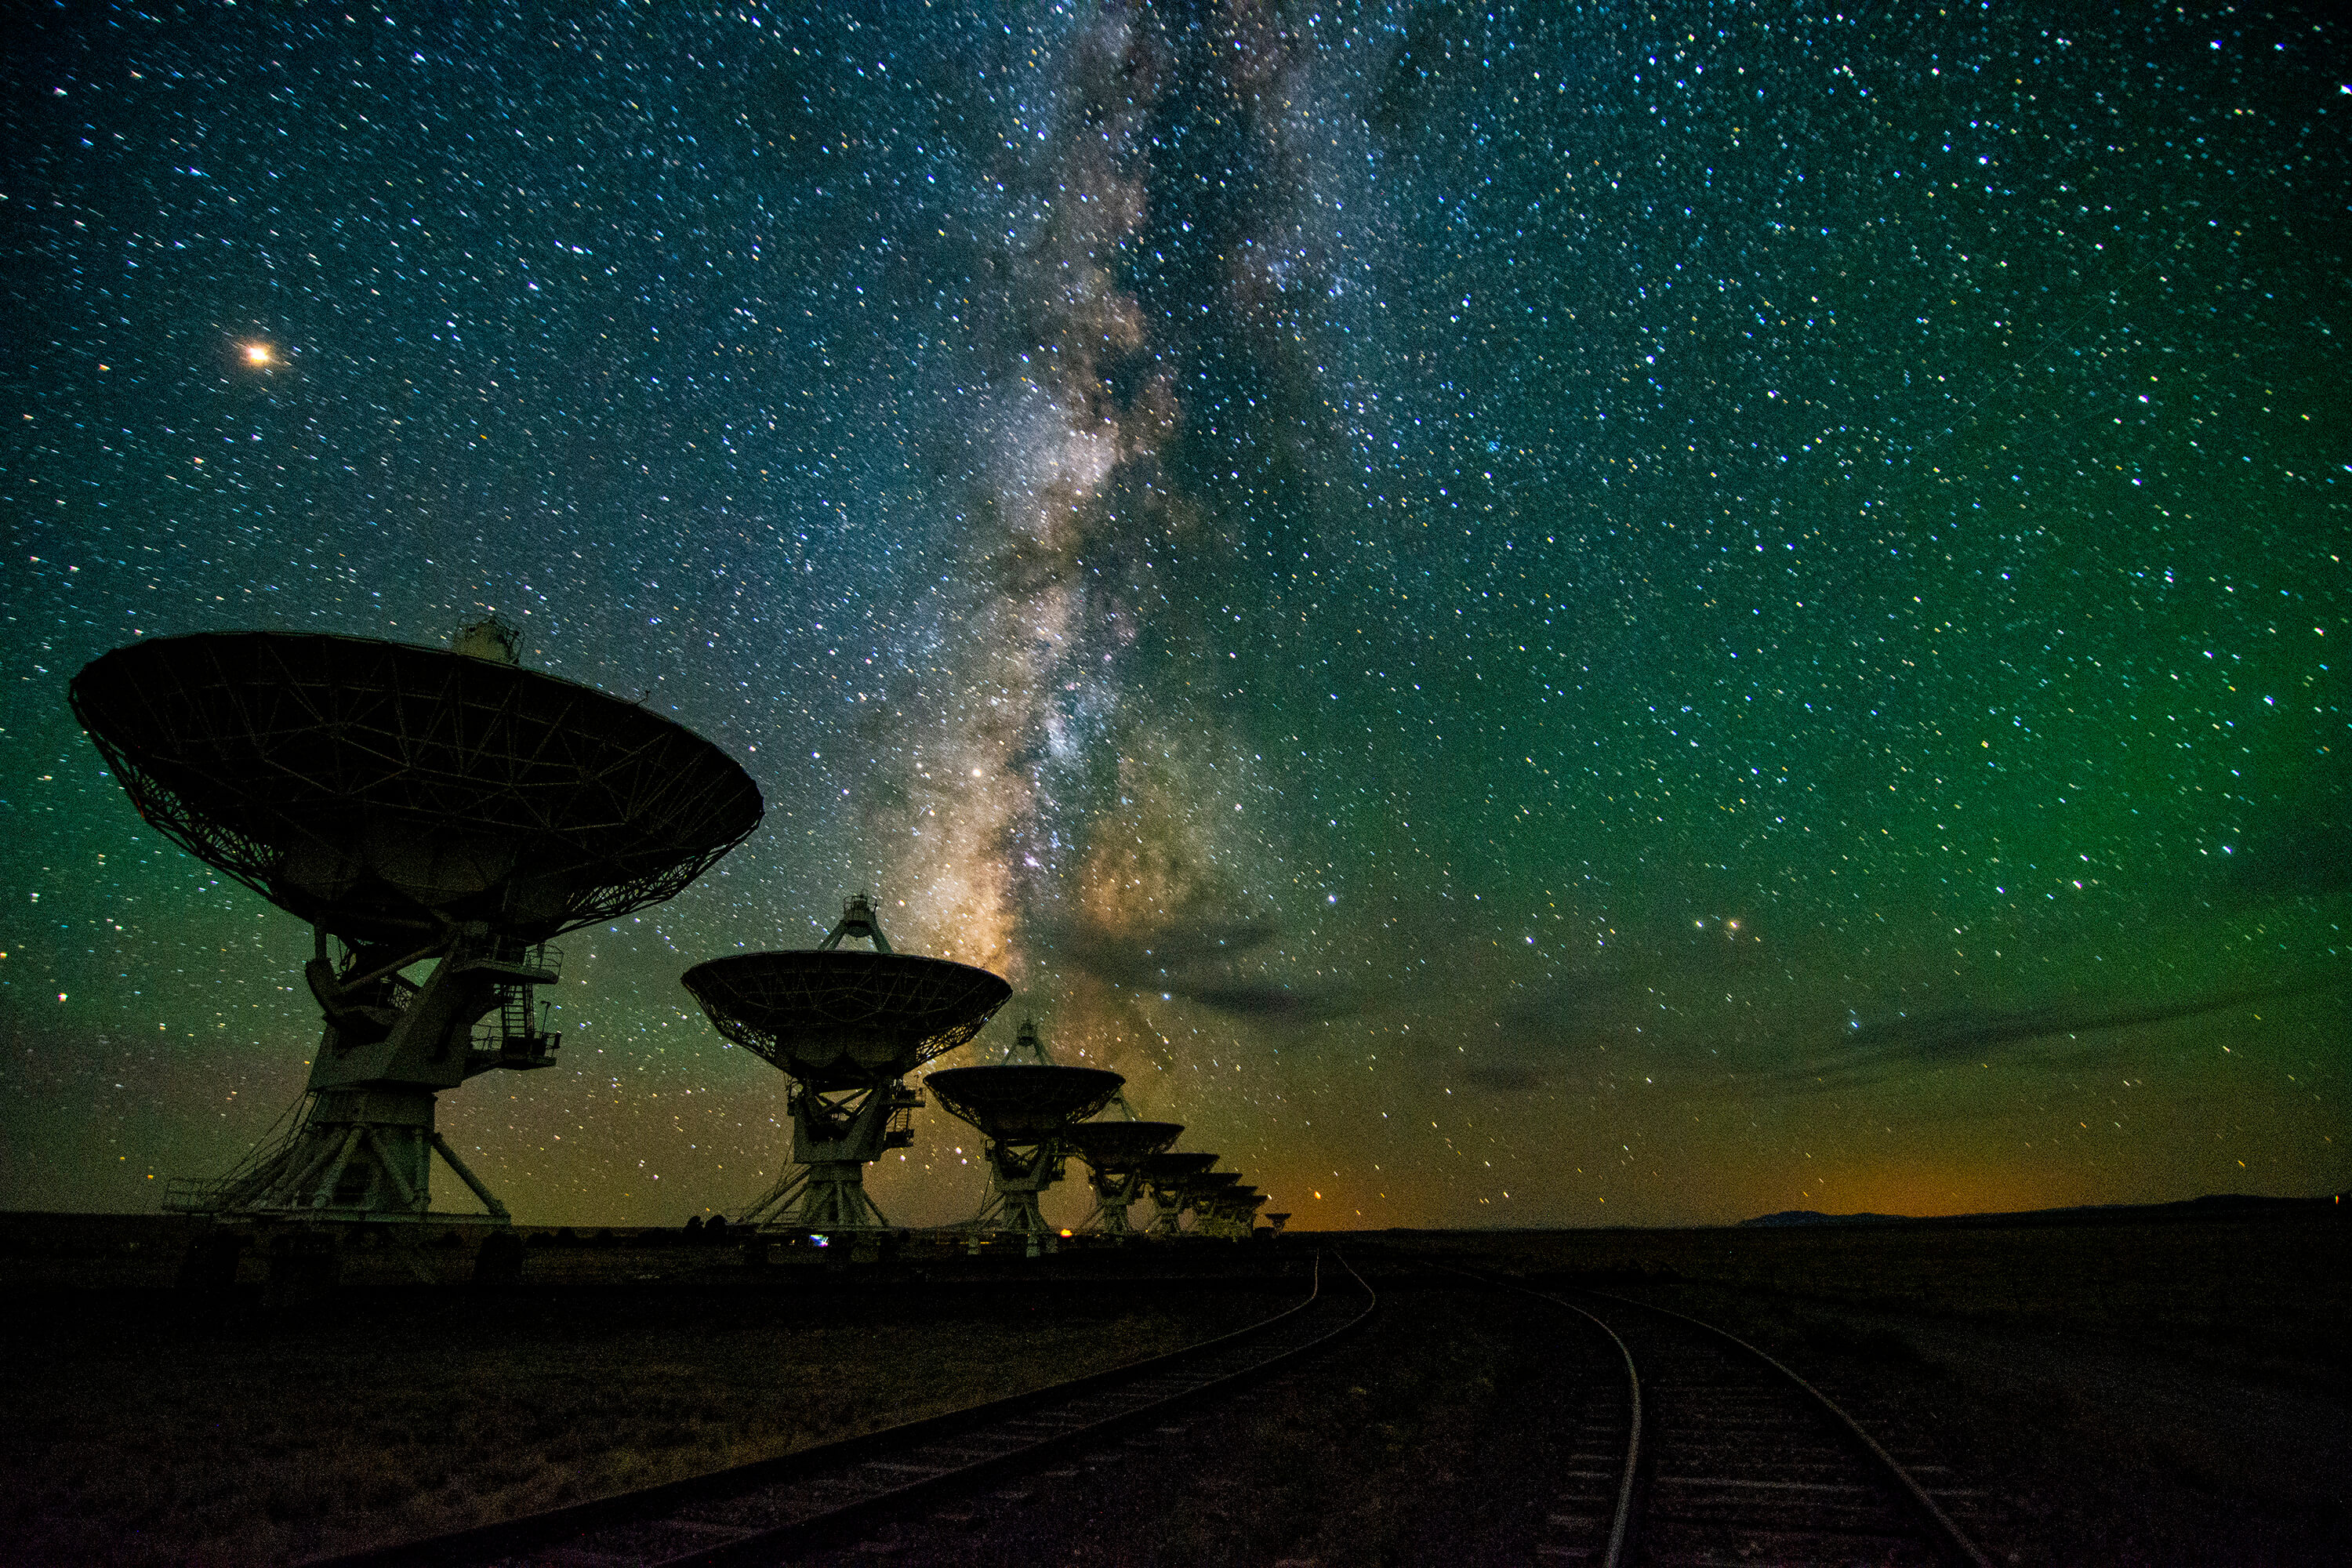 The Milky Way Galaxy seen over the Karl G. Jansky Very Large Array west of Socorro, New Mexico.